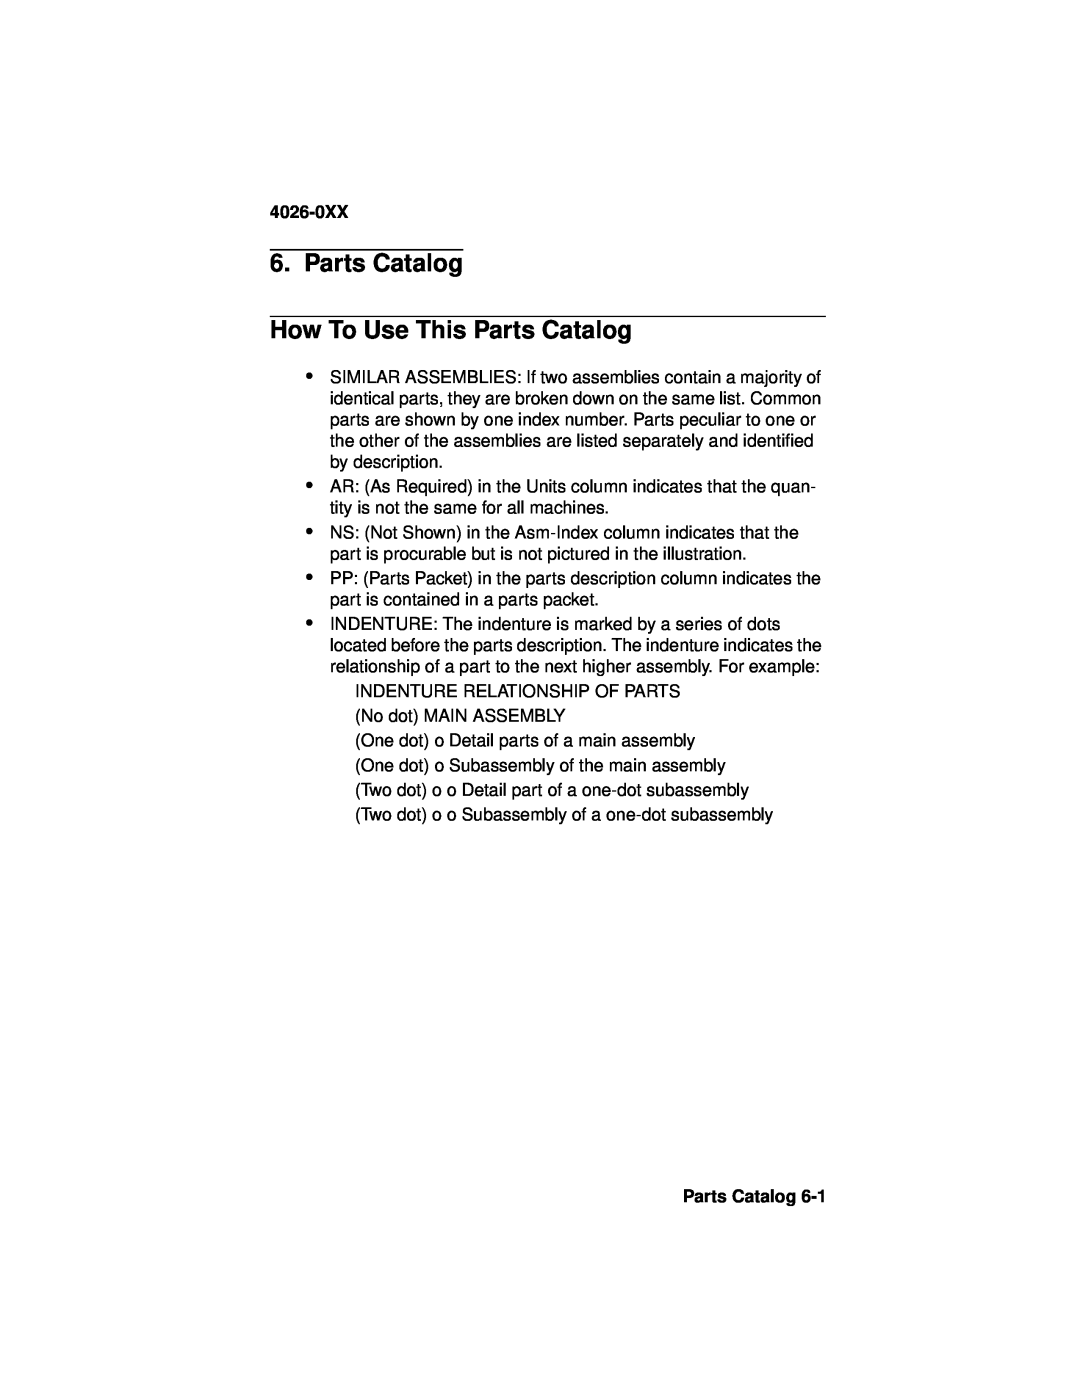 Lexmark OptraTM manual Parts Catalog How To Use This Parts Catalog, 4026-0XX 